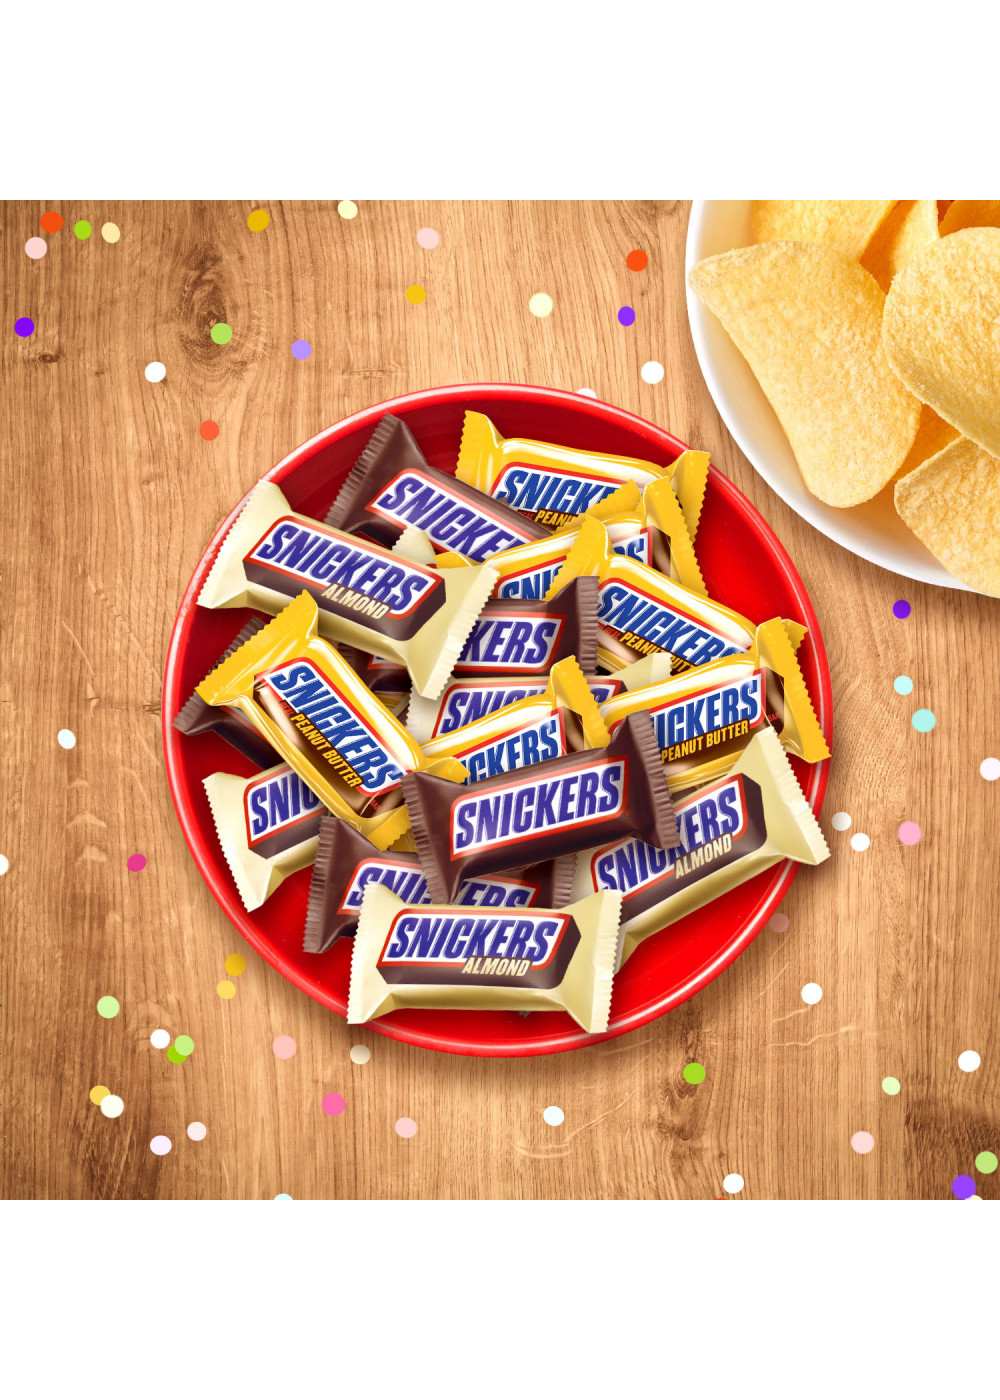 Snickers Assorted Fun Size Chocolate Candy - Party Size; image 7 of 7